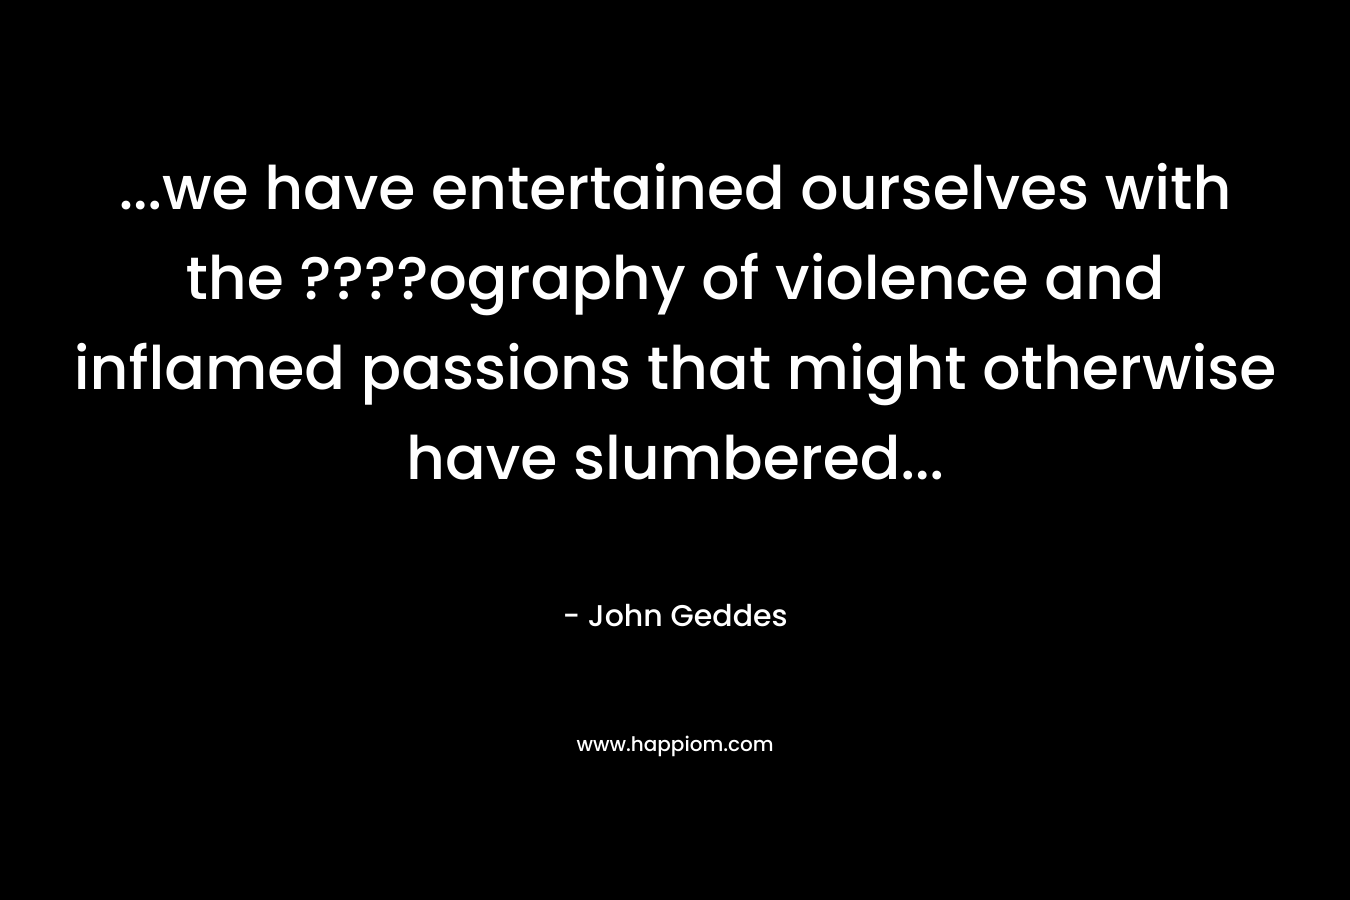 …we have entertained ourselves with the ????ography of violence and inflamed passions that might otherwise have slumbered… – John Geddes